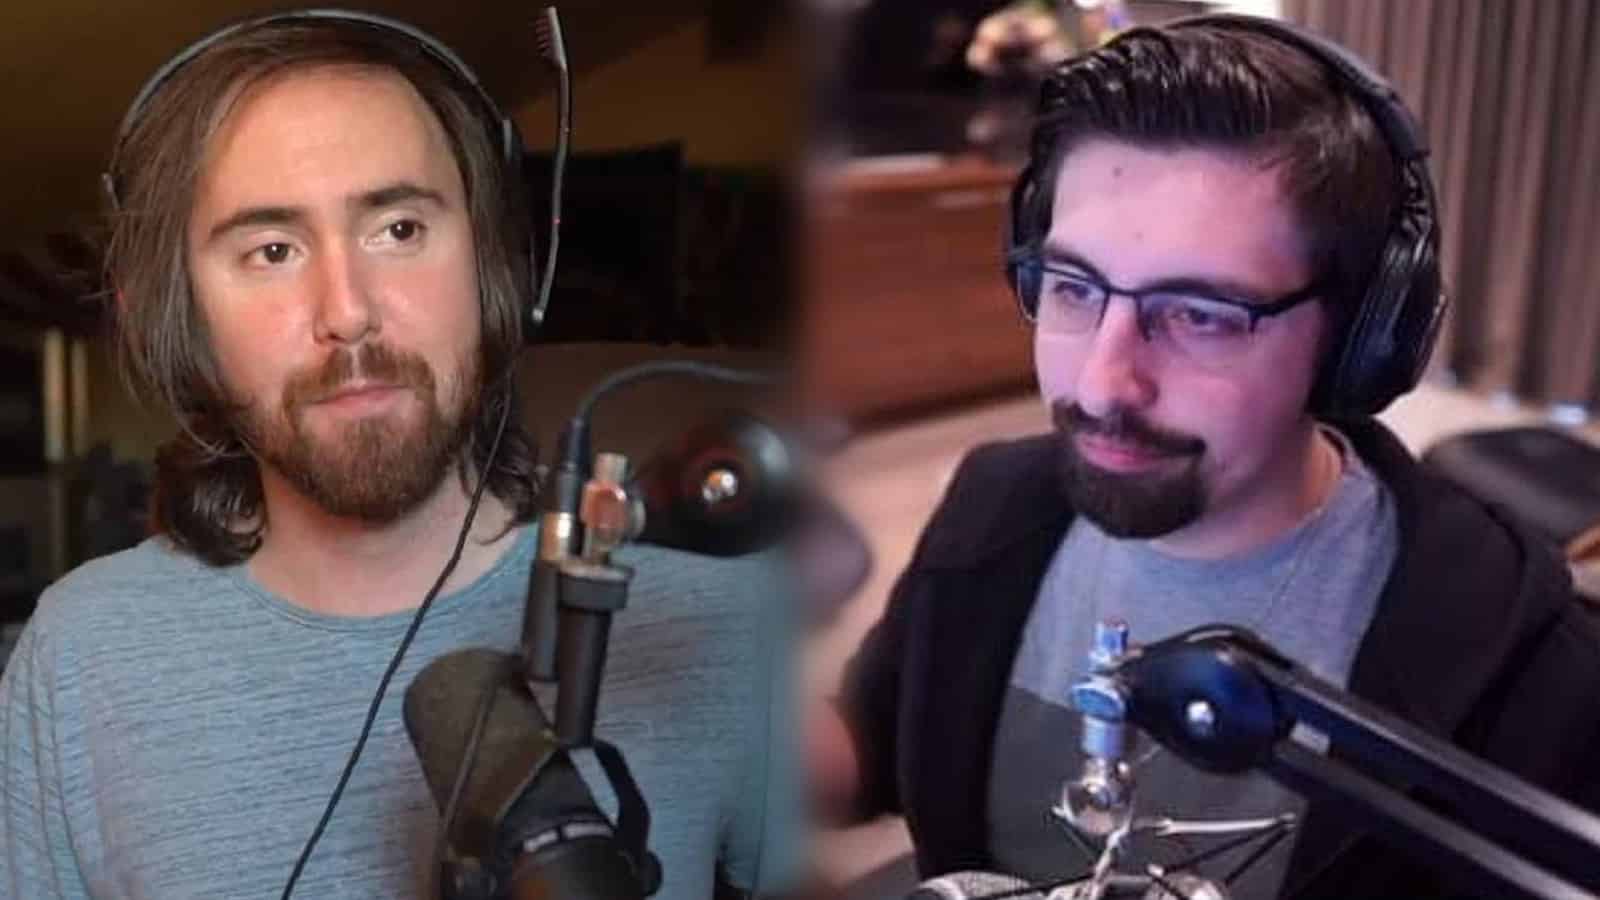 twitch streamers asmongold and shroud